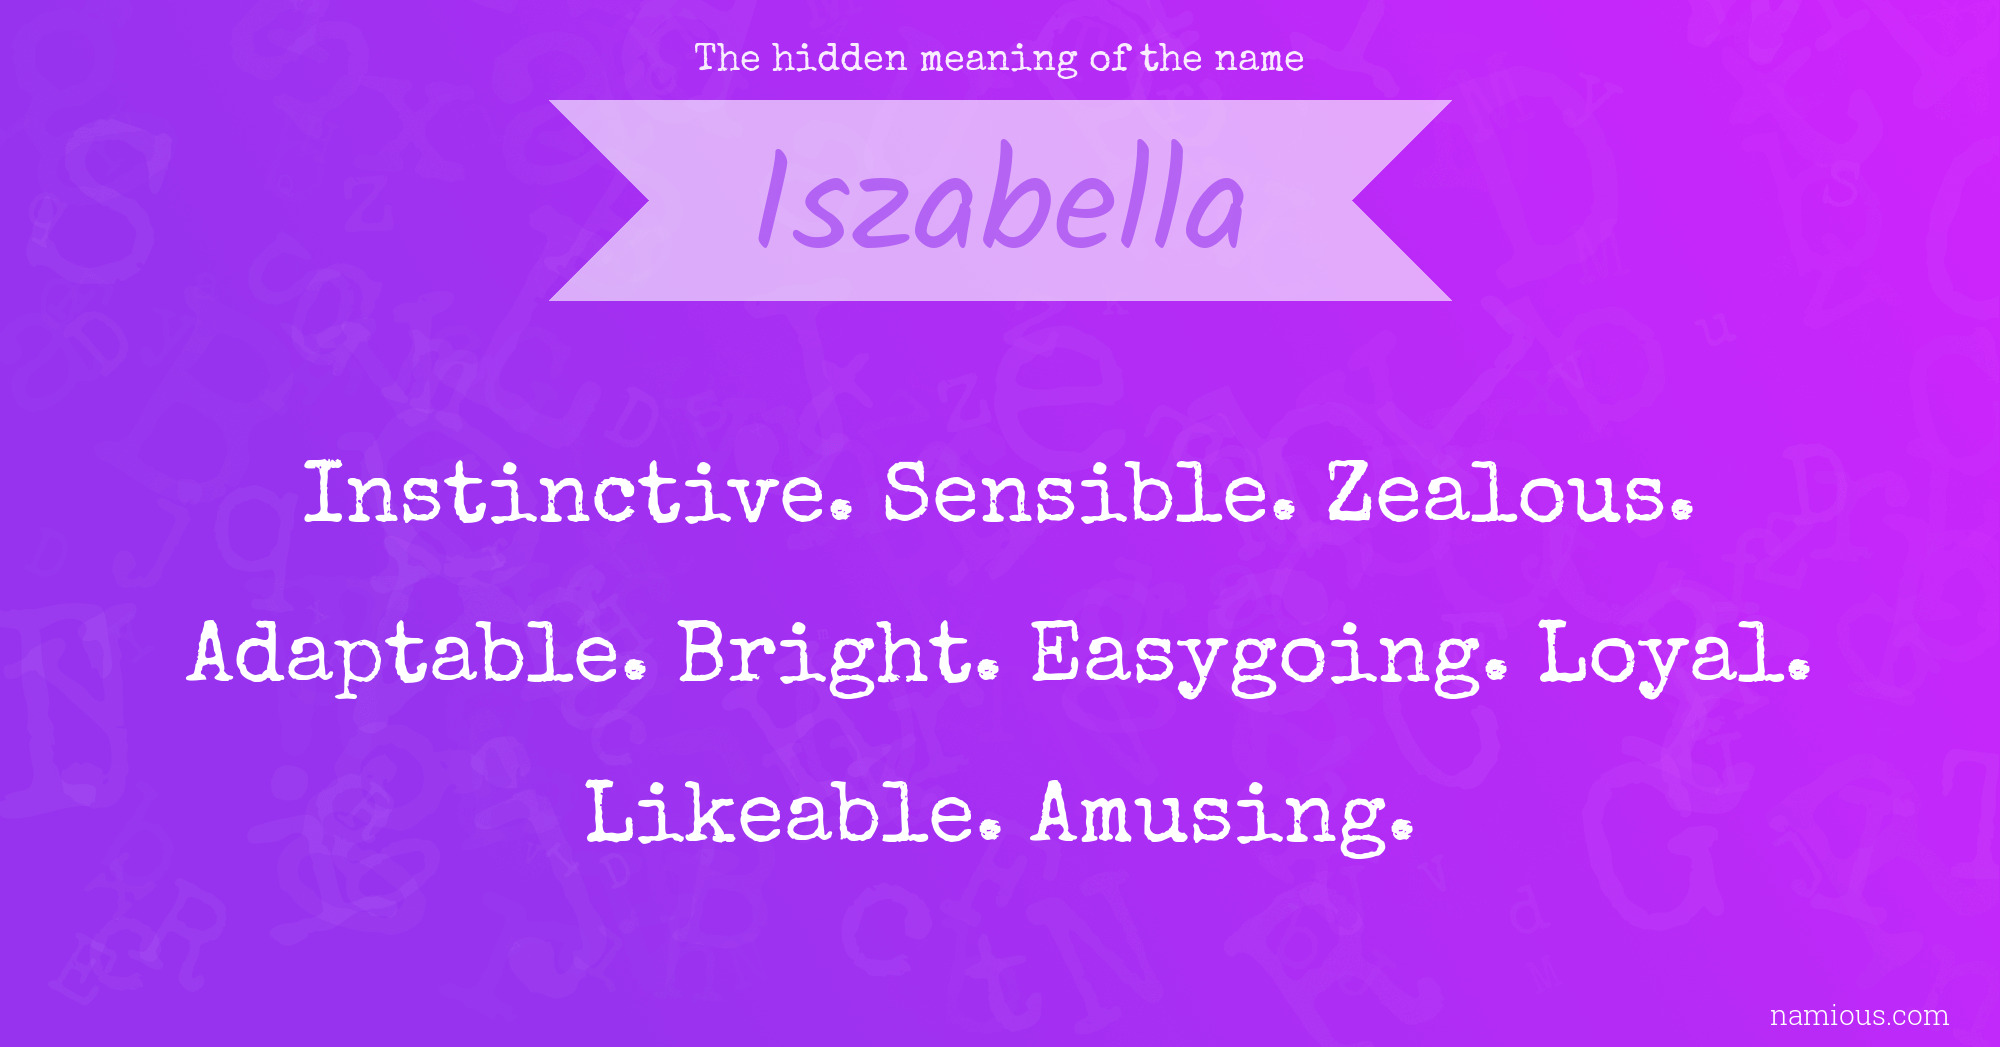 The hidden meaning of the name Iszabella